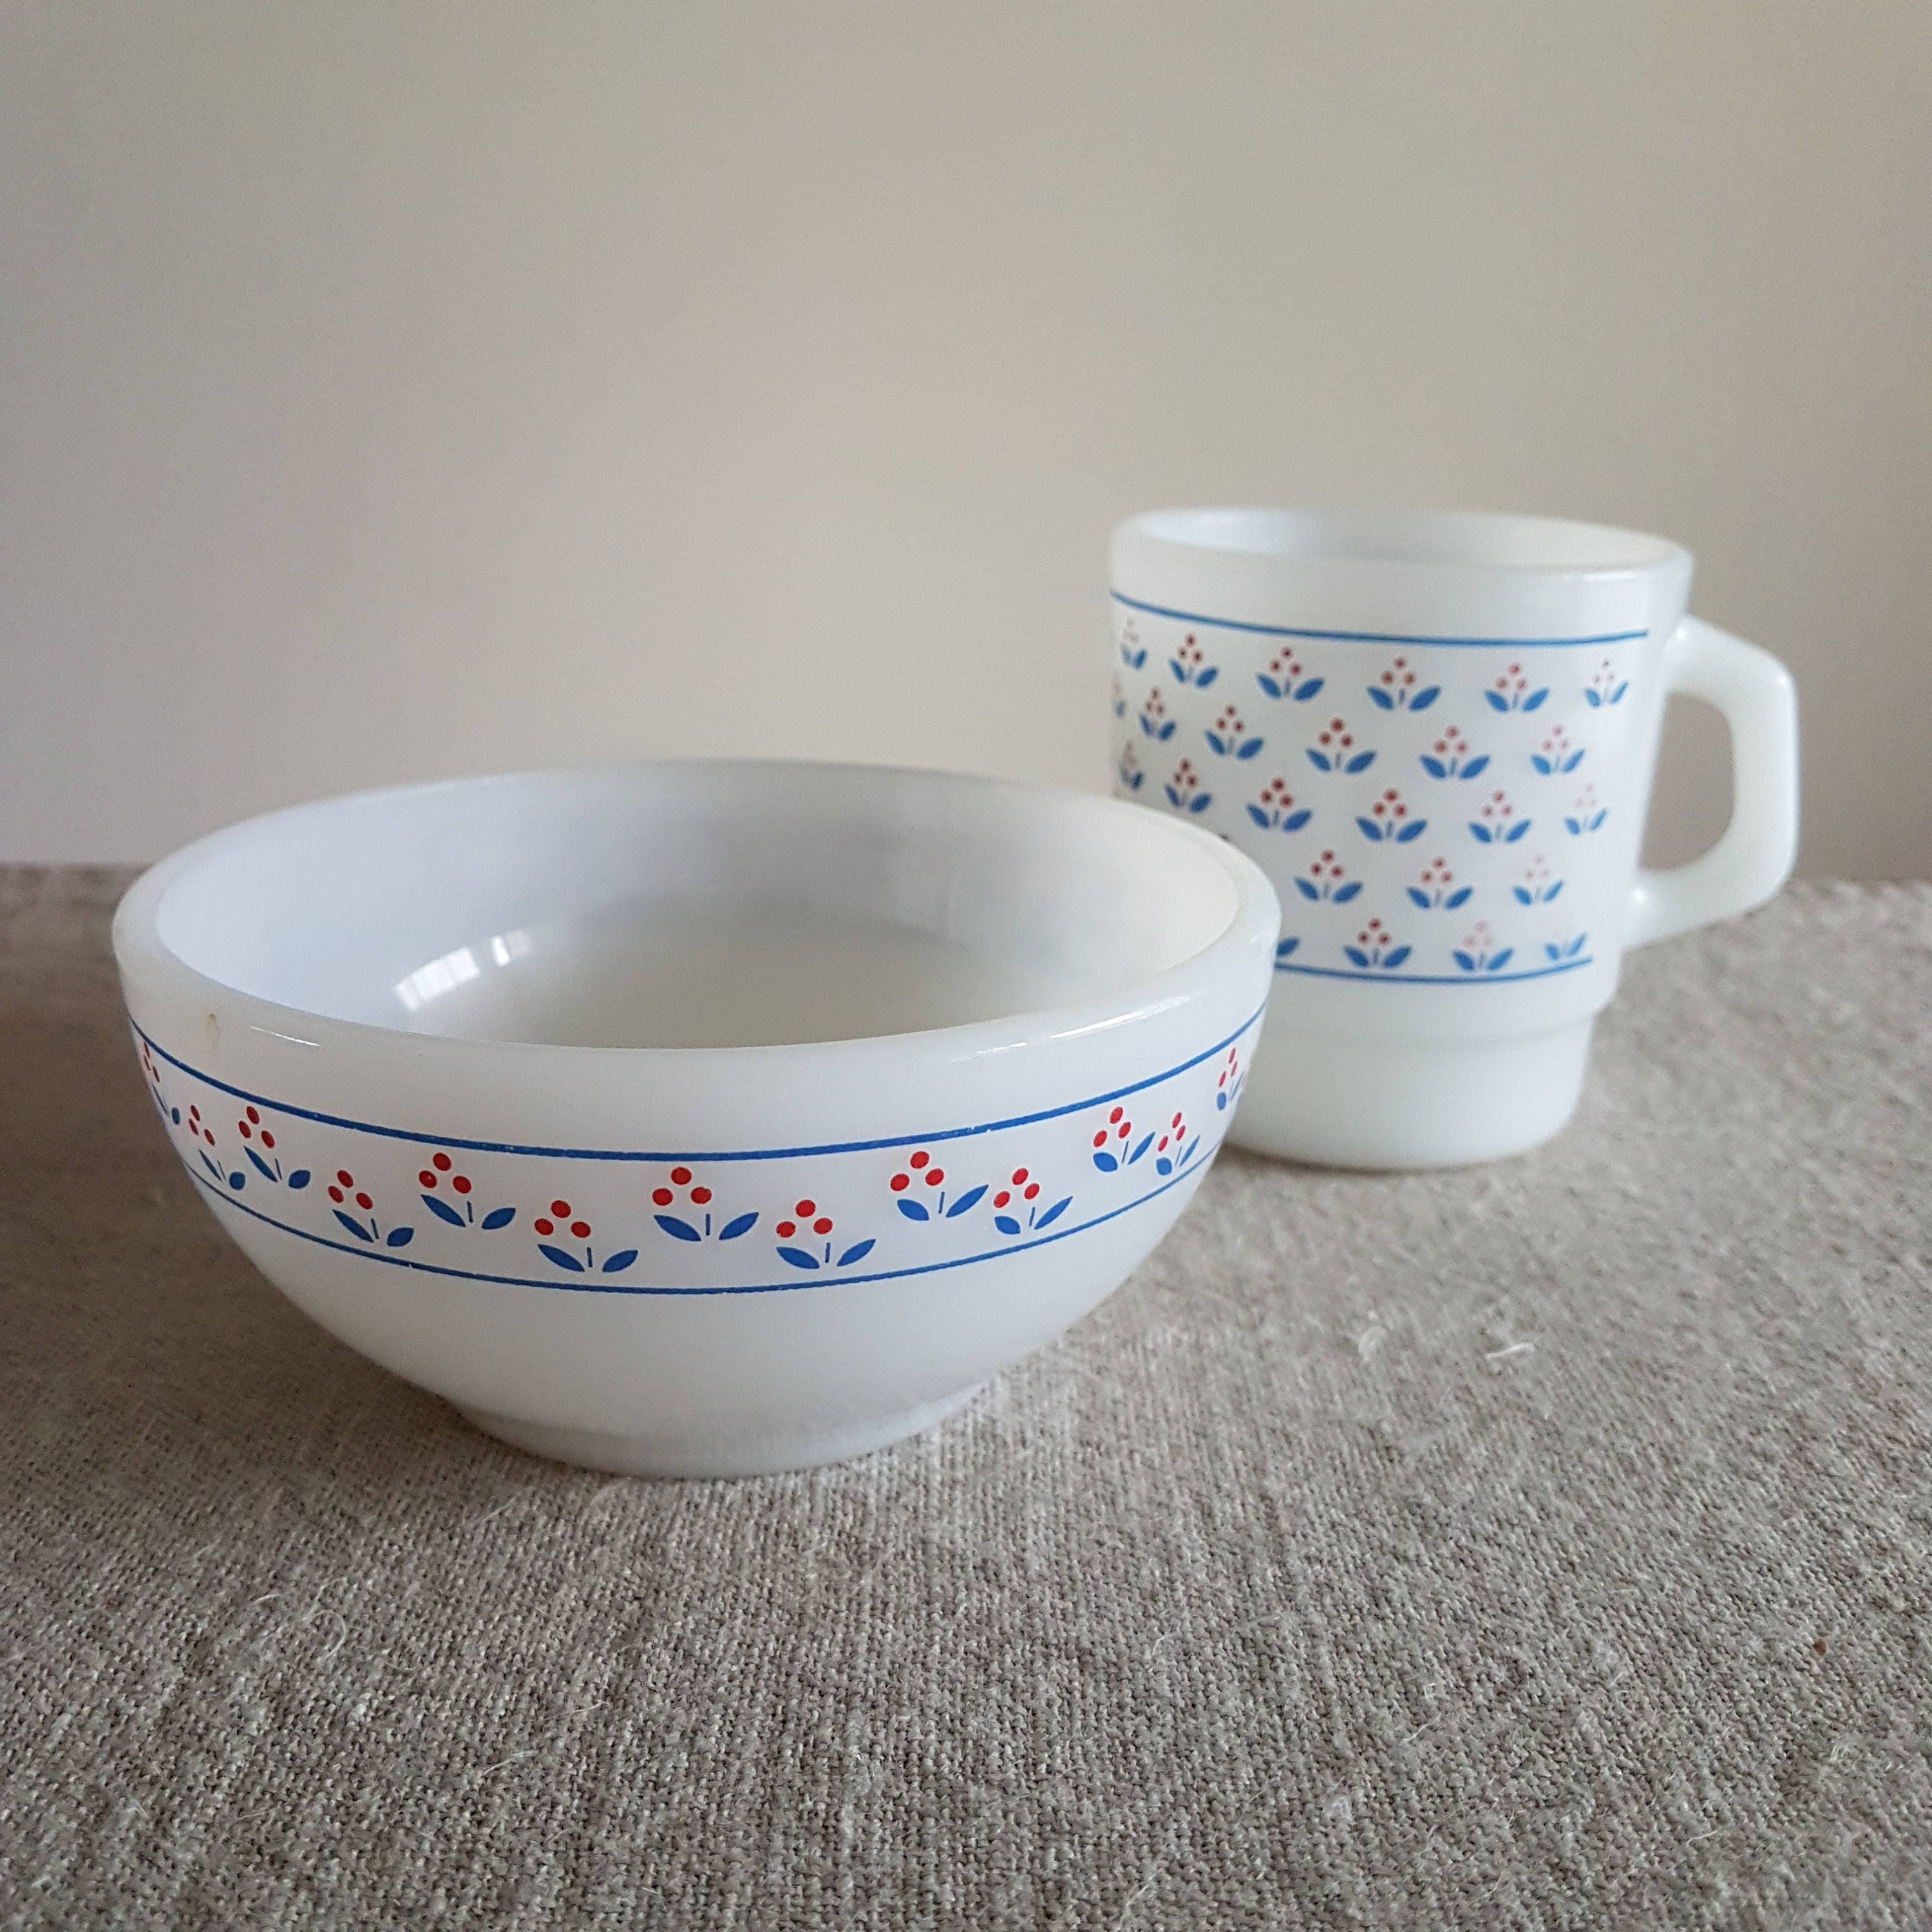 Set of 2 Termo Rey coffee cup & cereal bowl // blue red | Etsy